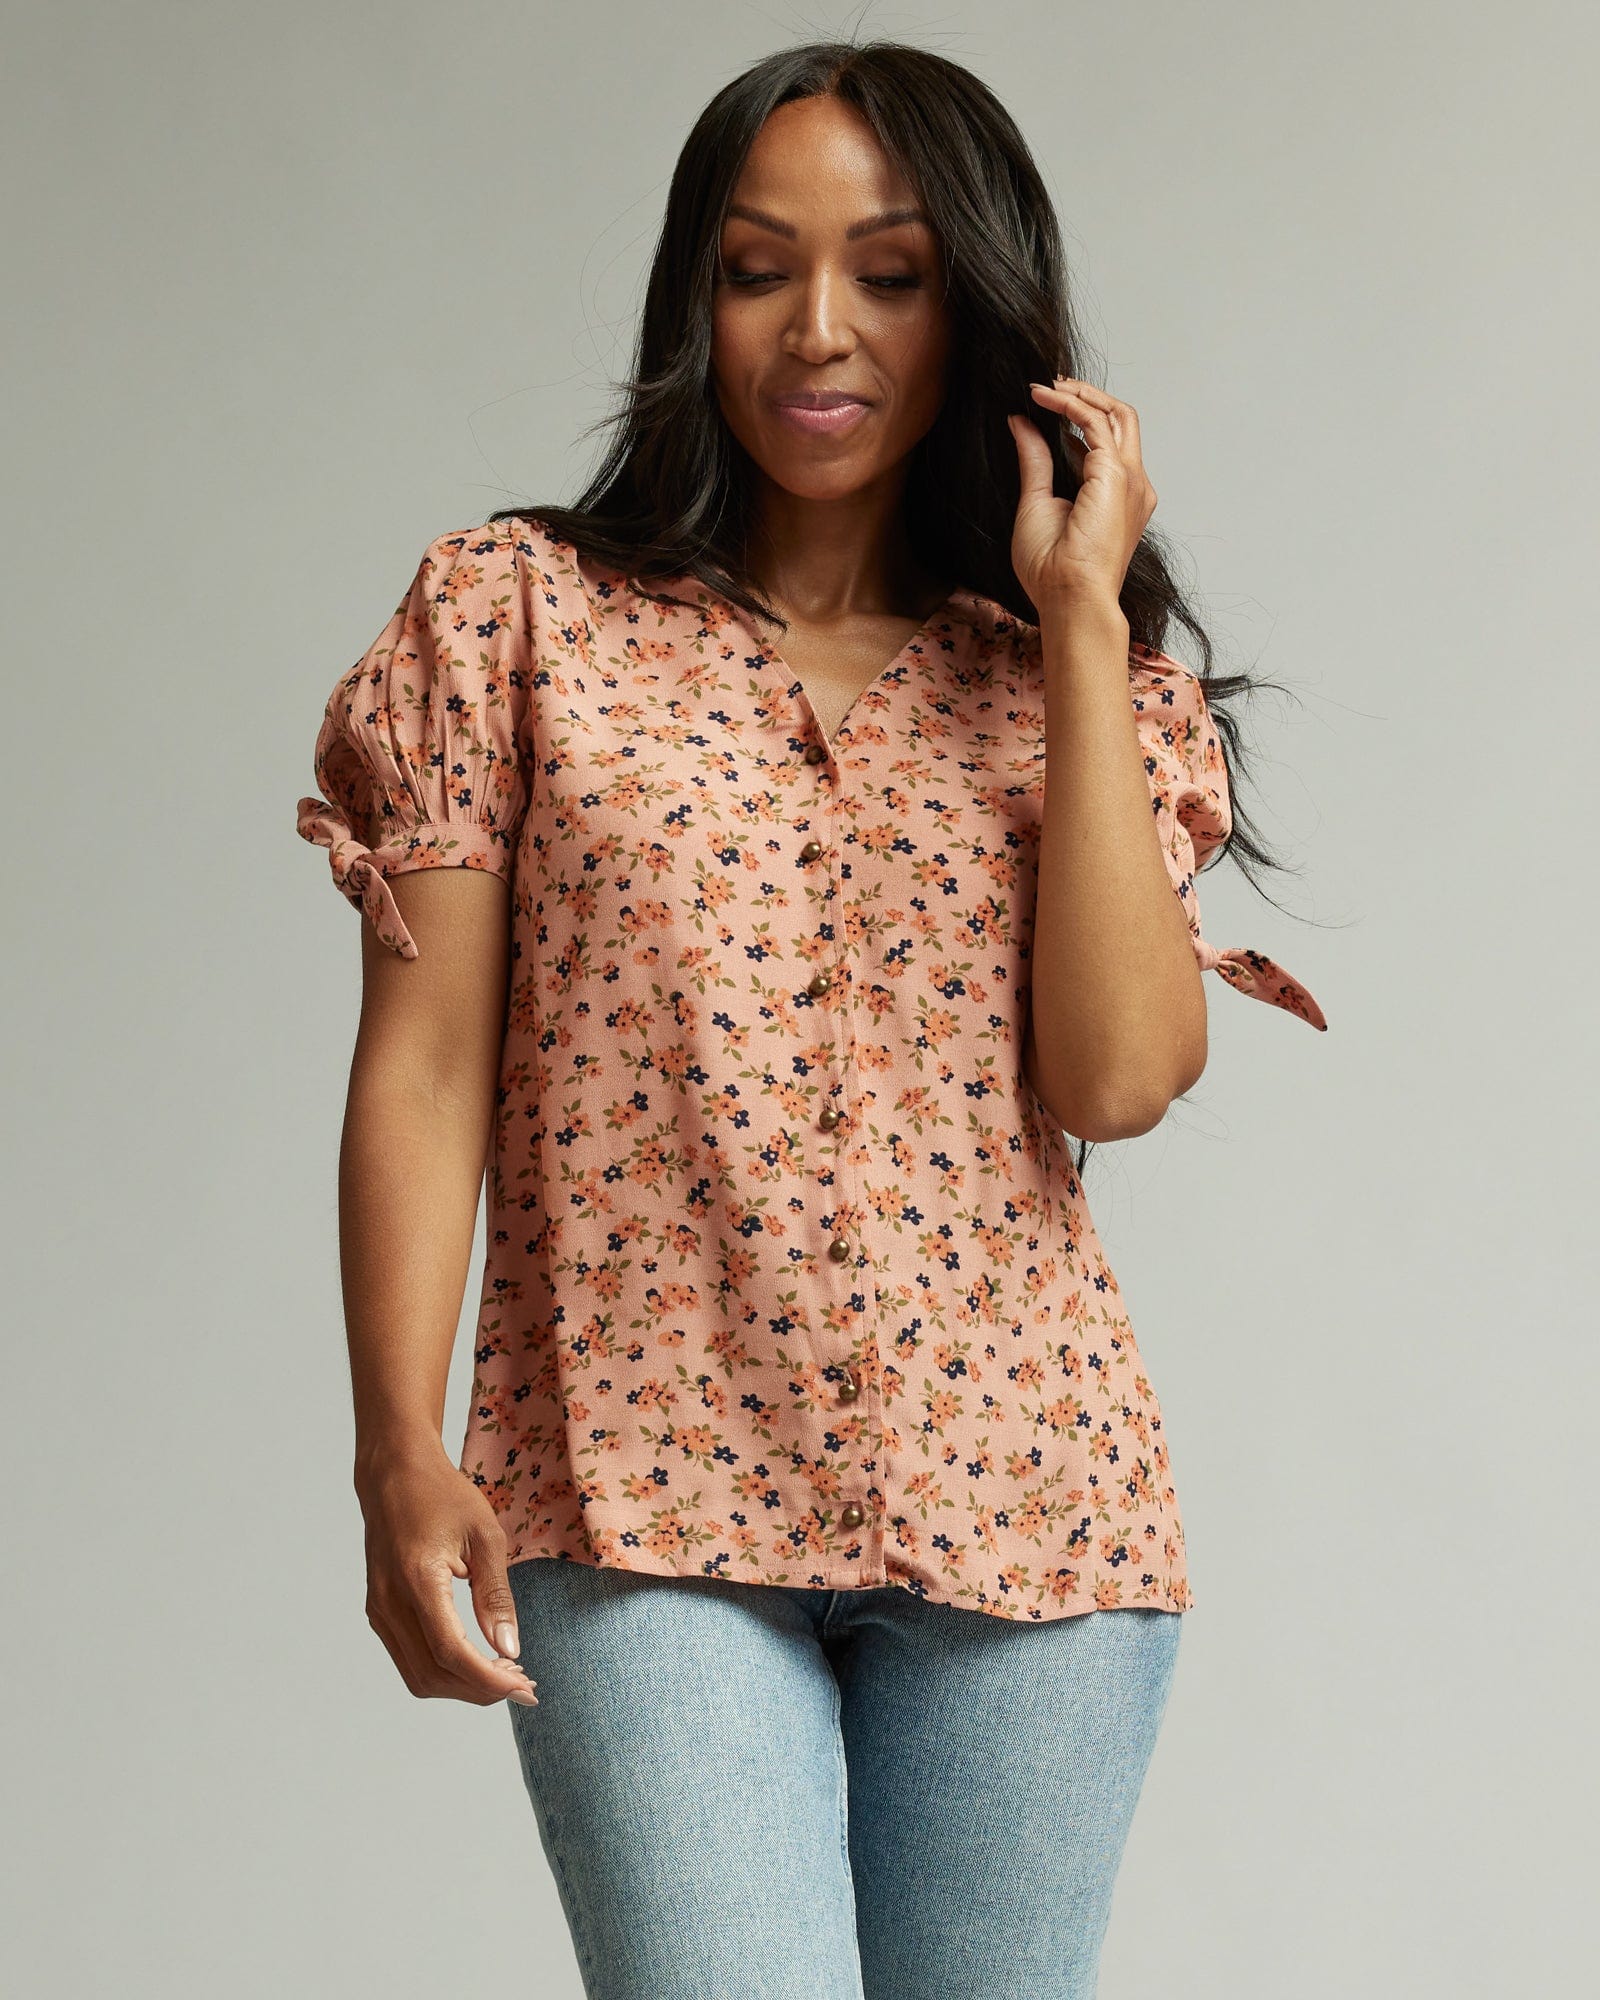 Woman in a short sleeve, pink floral print top